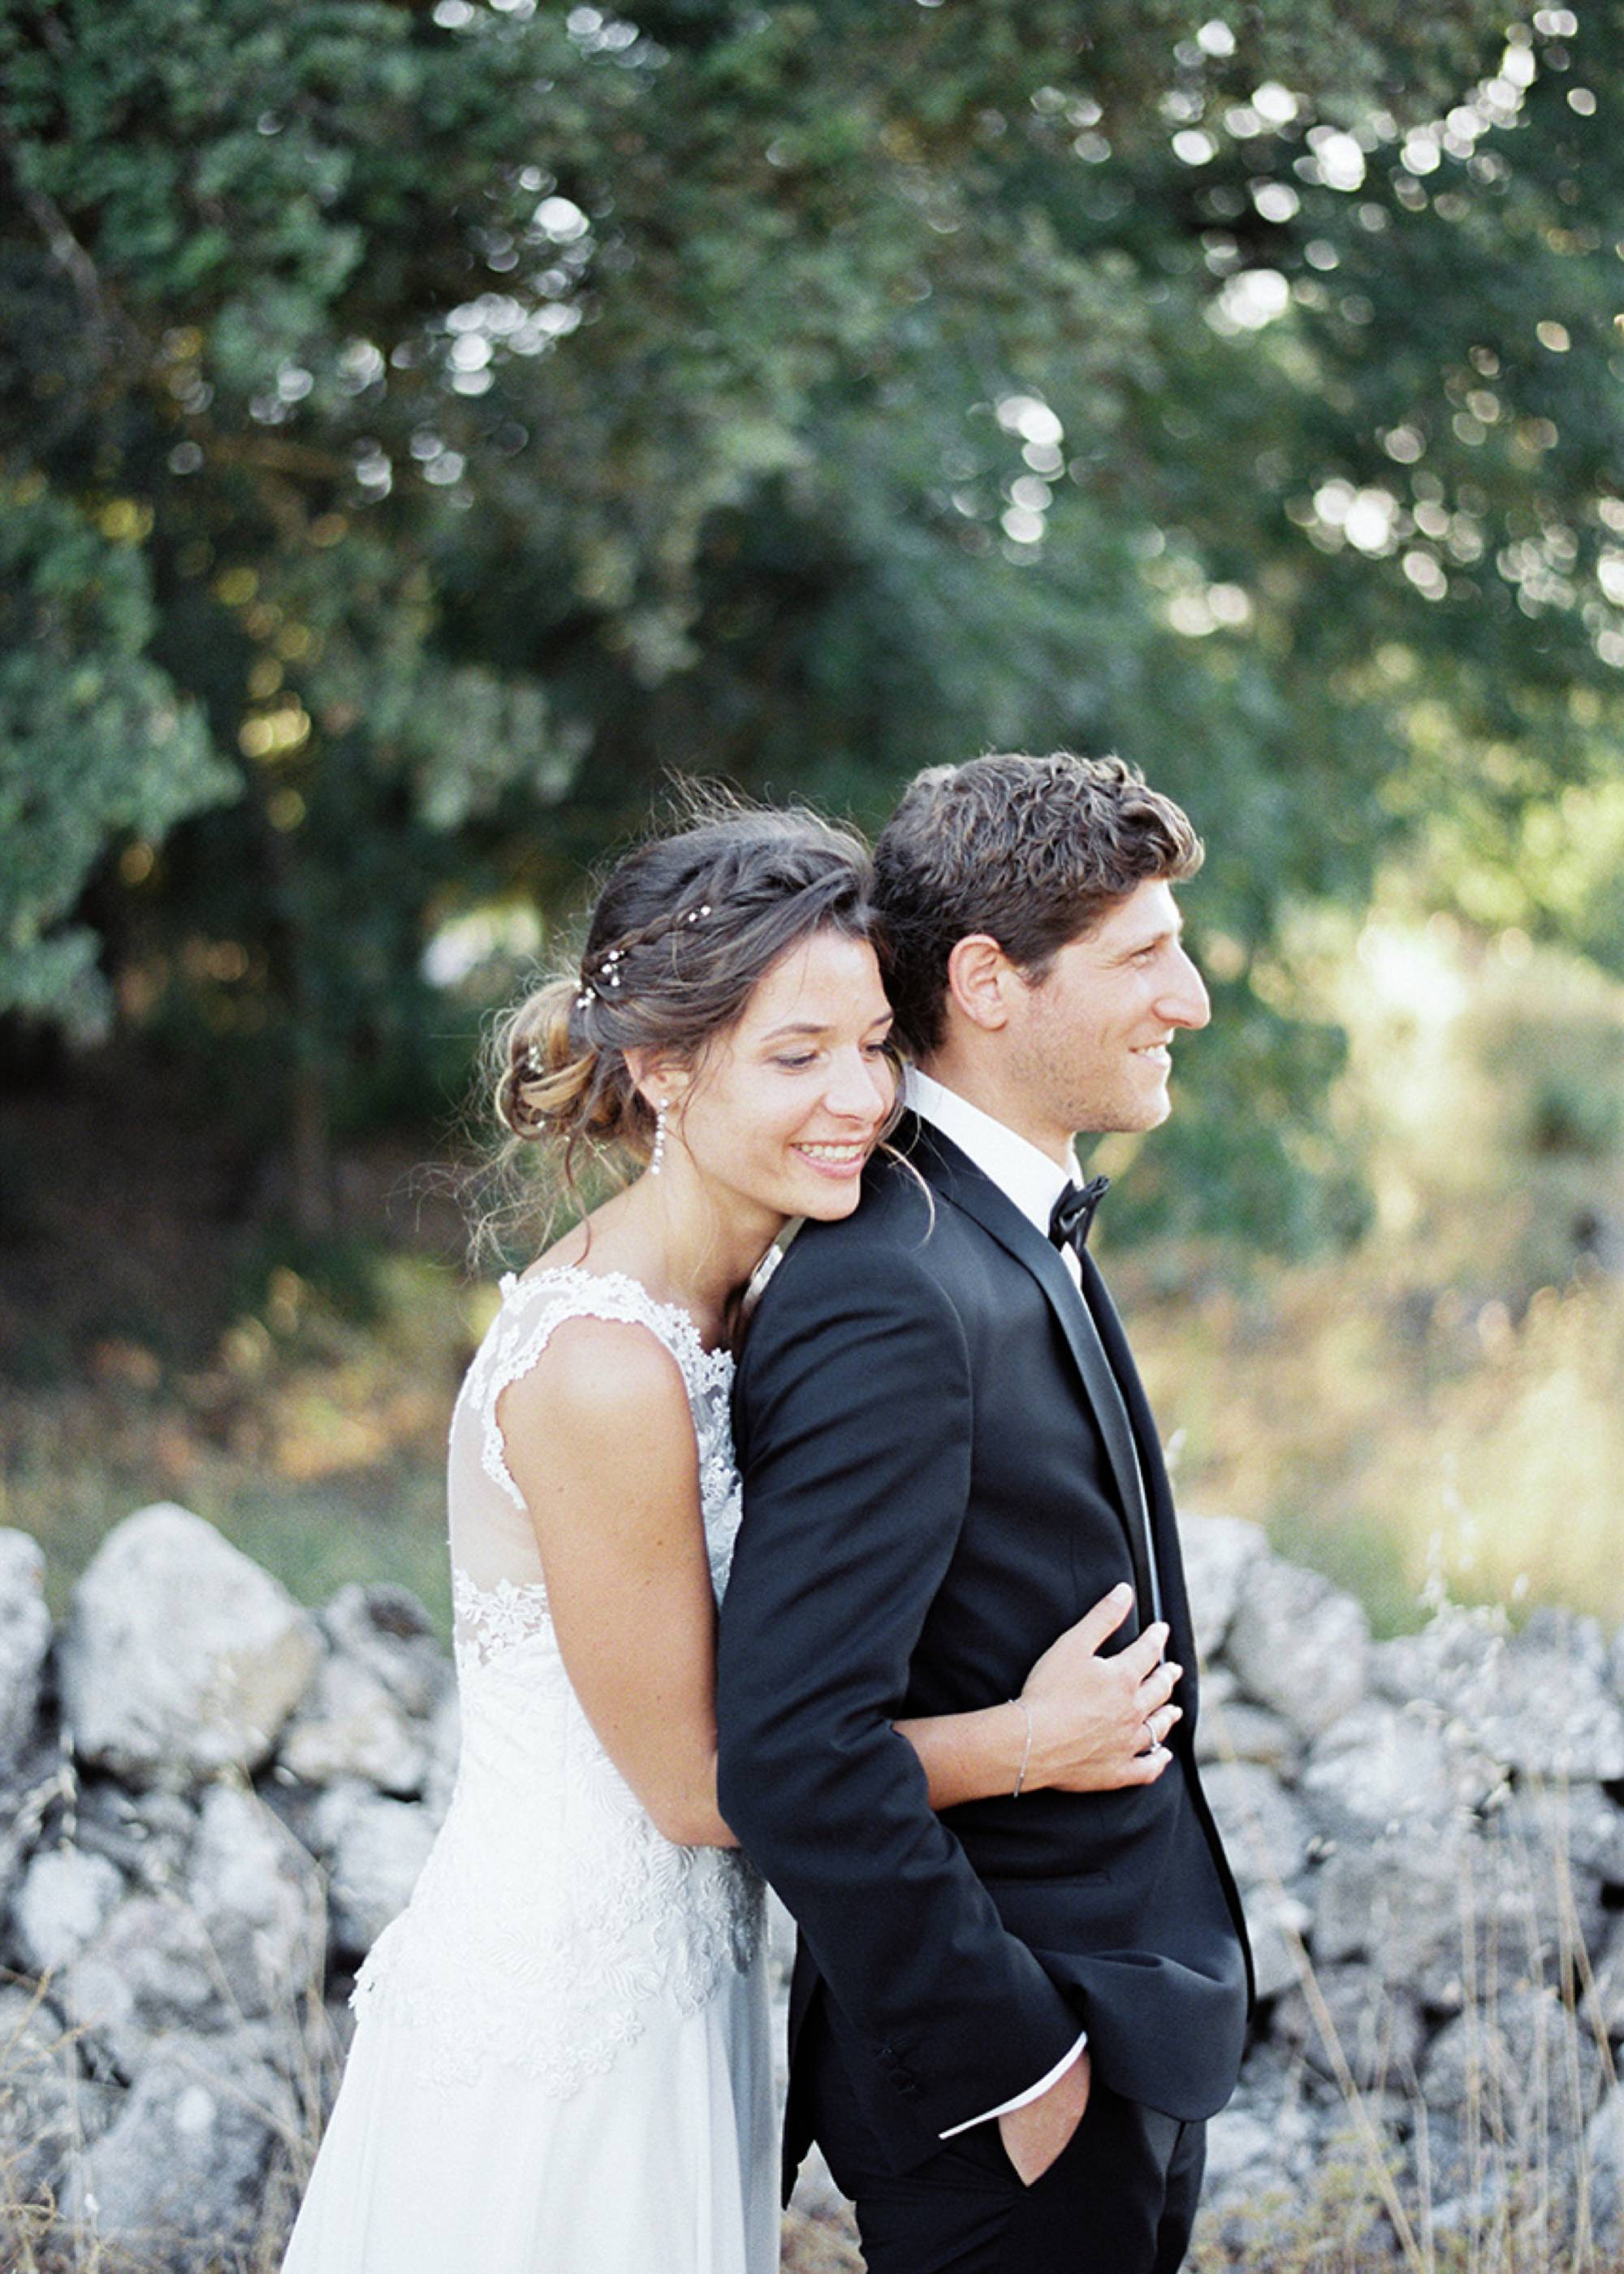 Fine art photography South of France - Bride and groom portrait